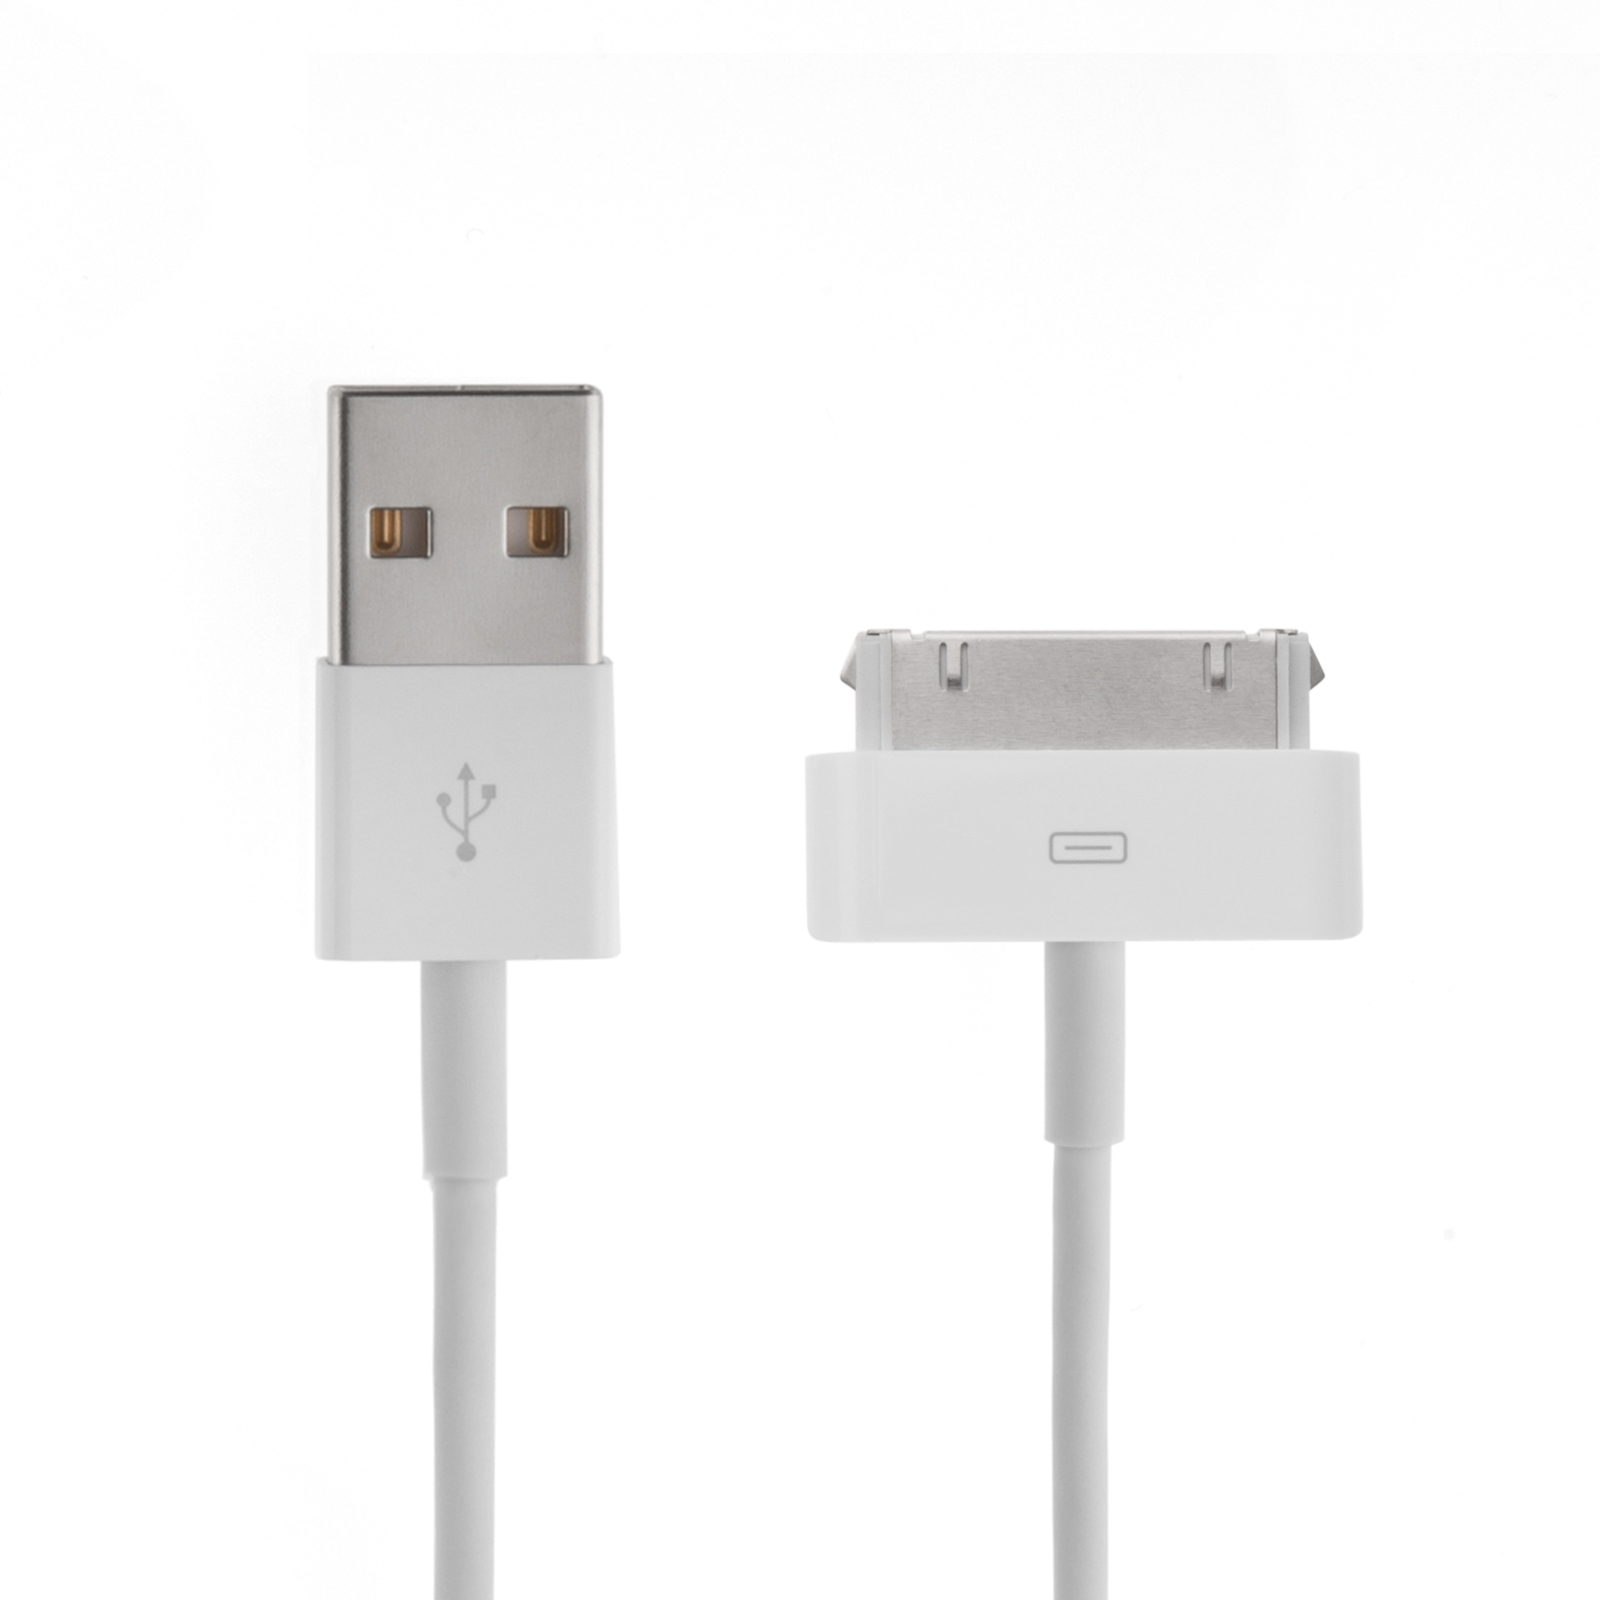 Official Apple 30-pin to USB Cable for iPhone 3G/3Gs, iPhone 4/4S